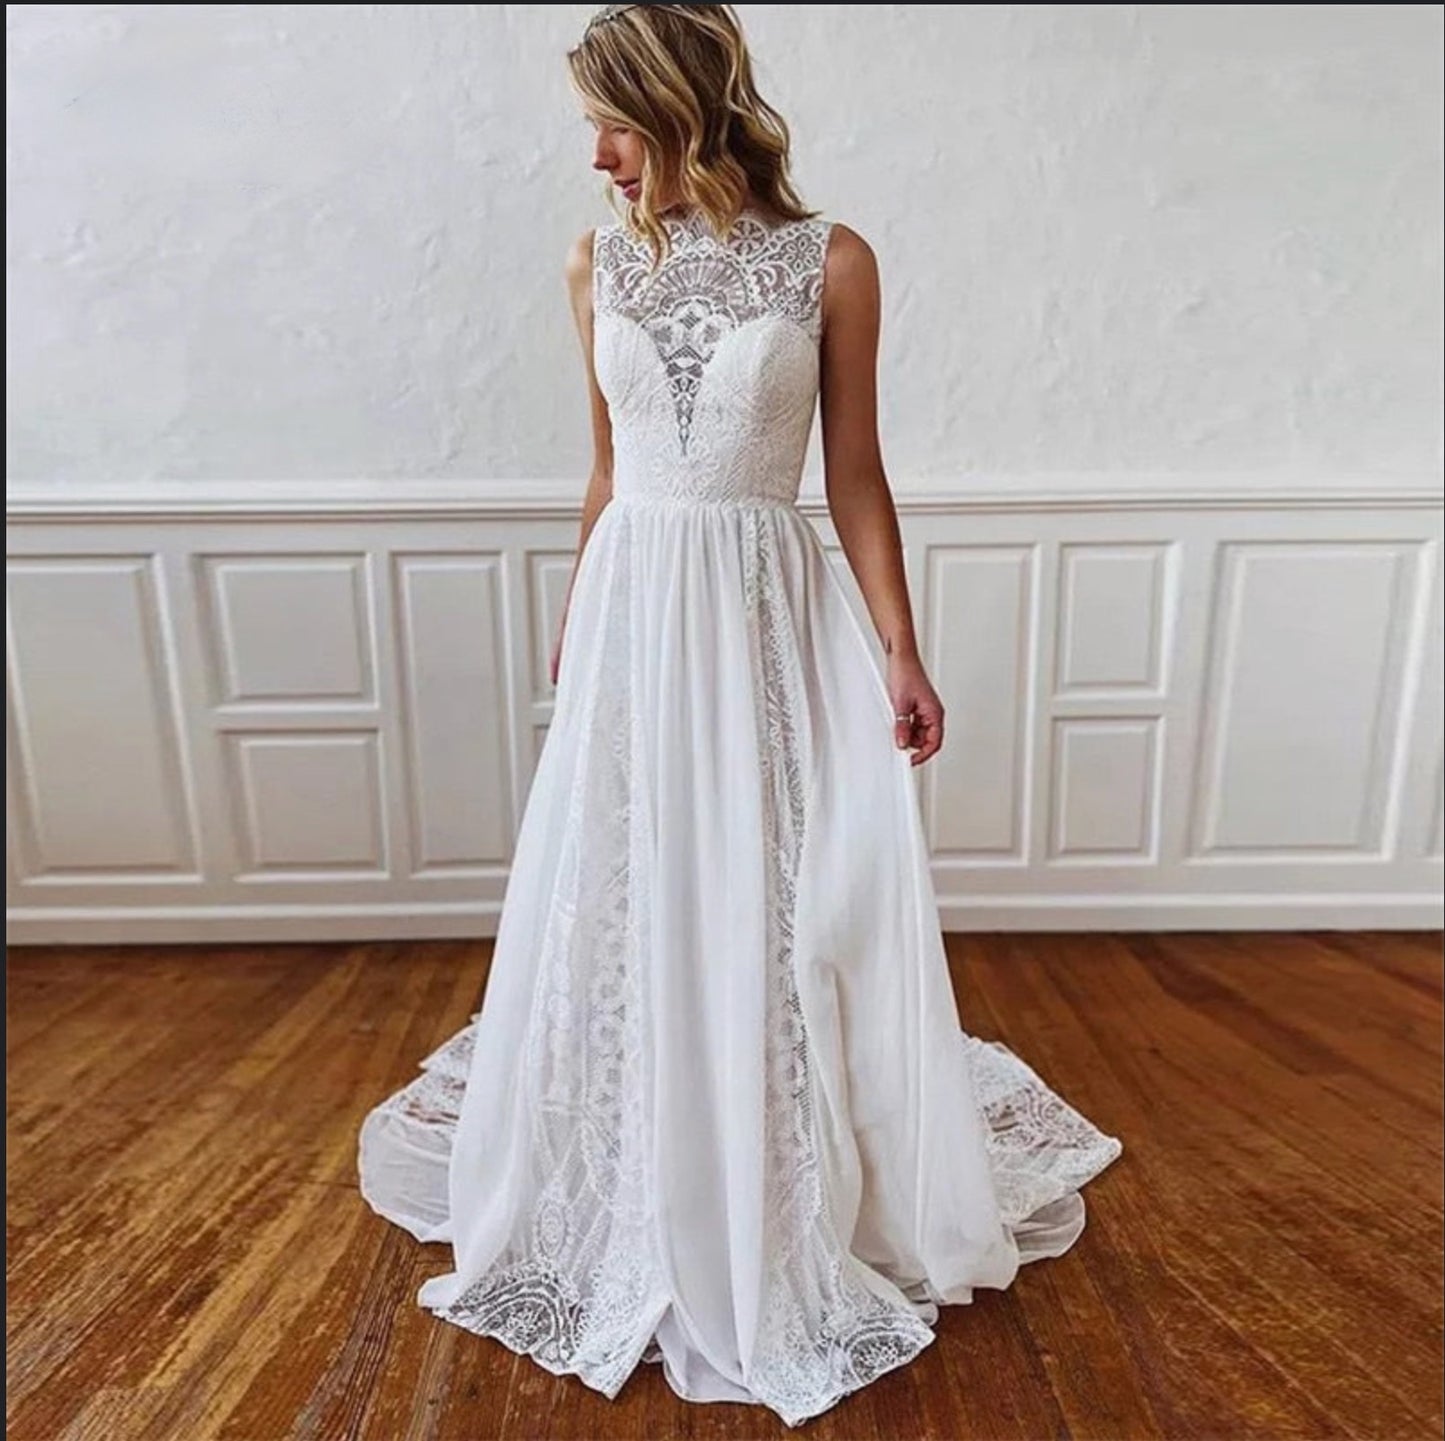 Load image into Gallery viewer, Sleeveless Lace Wedding Dress A-Line Boho Bridal Beach Gown
